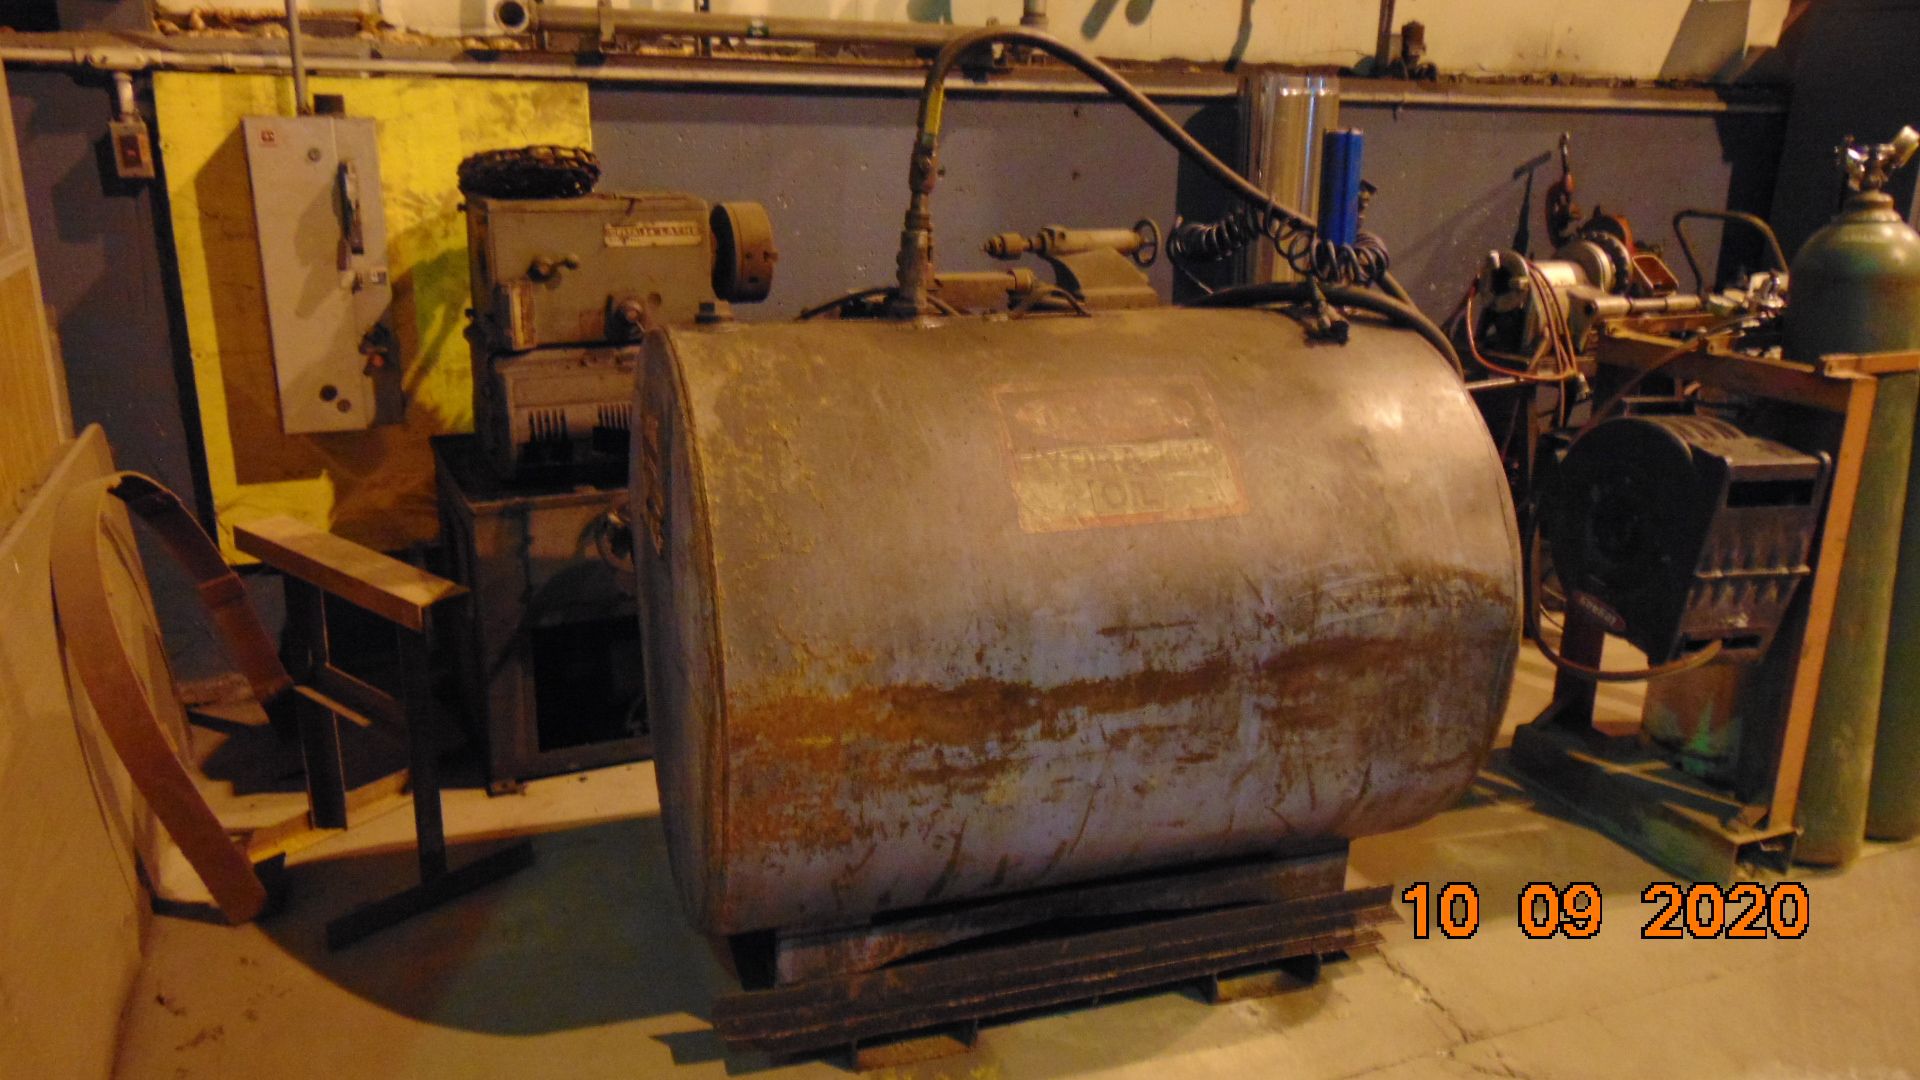 Contents in Properzi Roll Mill Building - Image 7 of 21